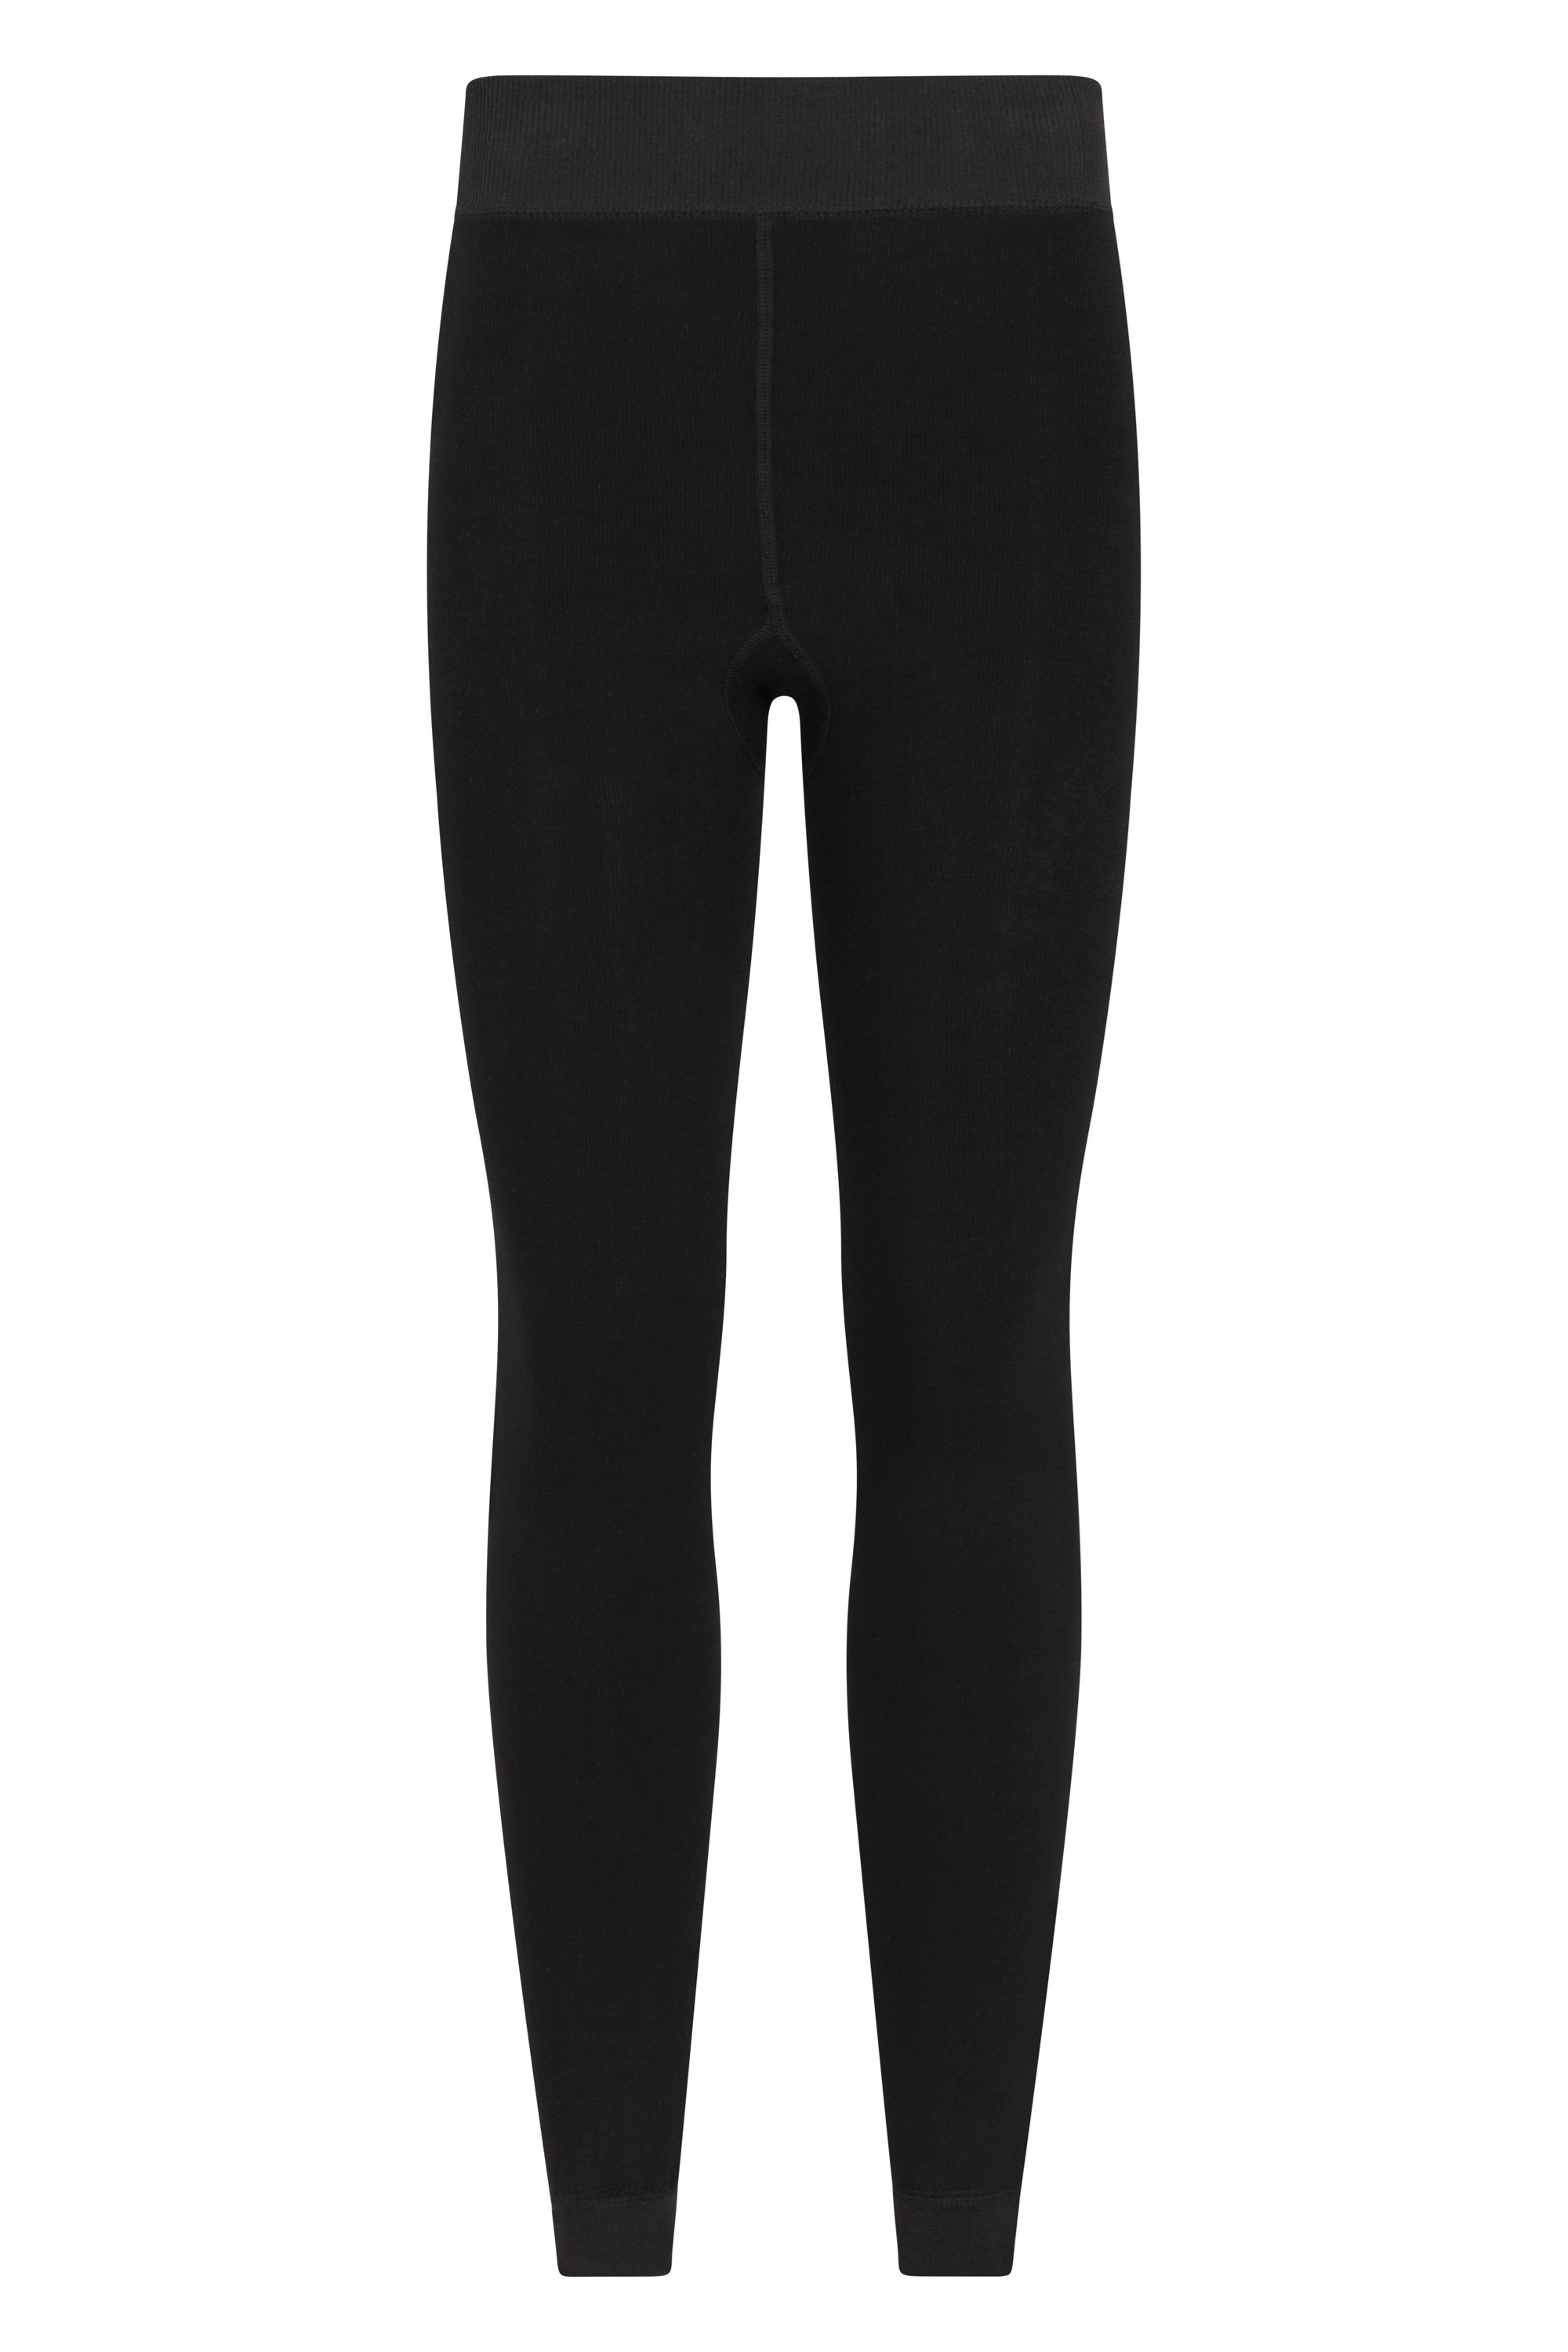 Charmo Thermal Fleece Lined Leggings Women High Waisted Winter Yoga Pants  with Pockets Black M - ShopStyle Trousers